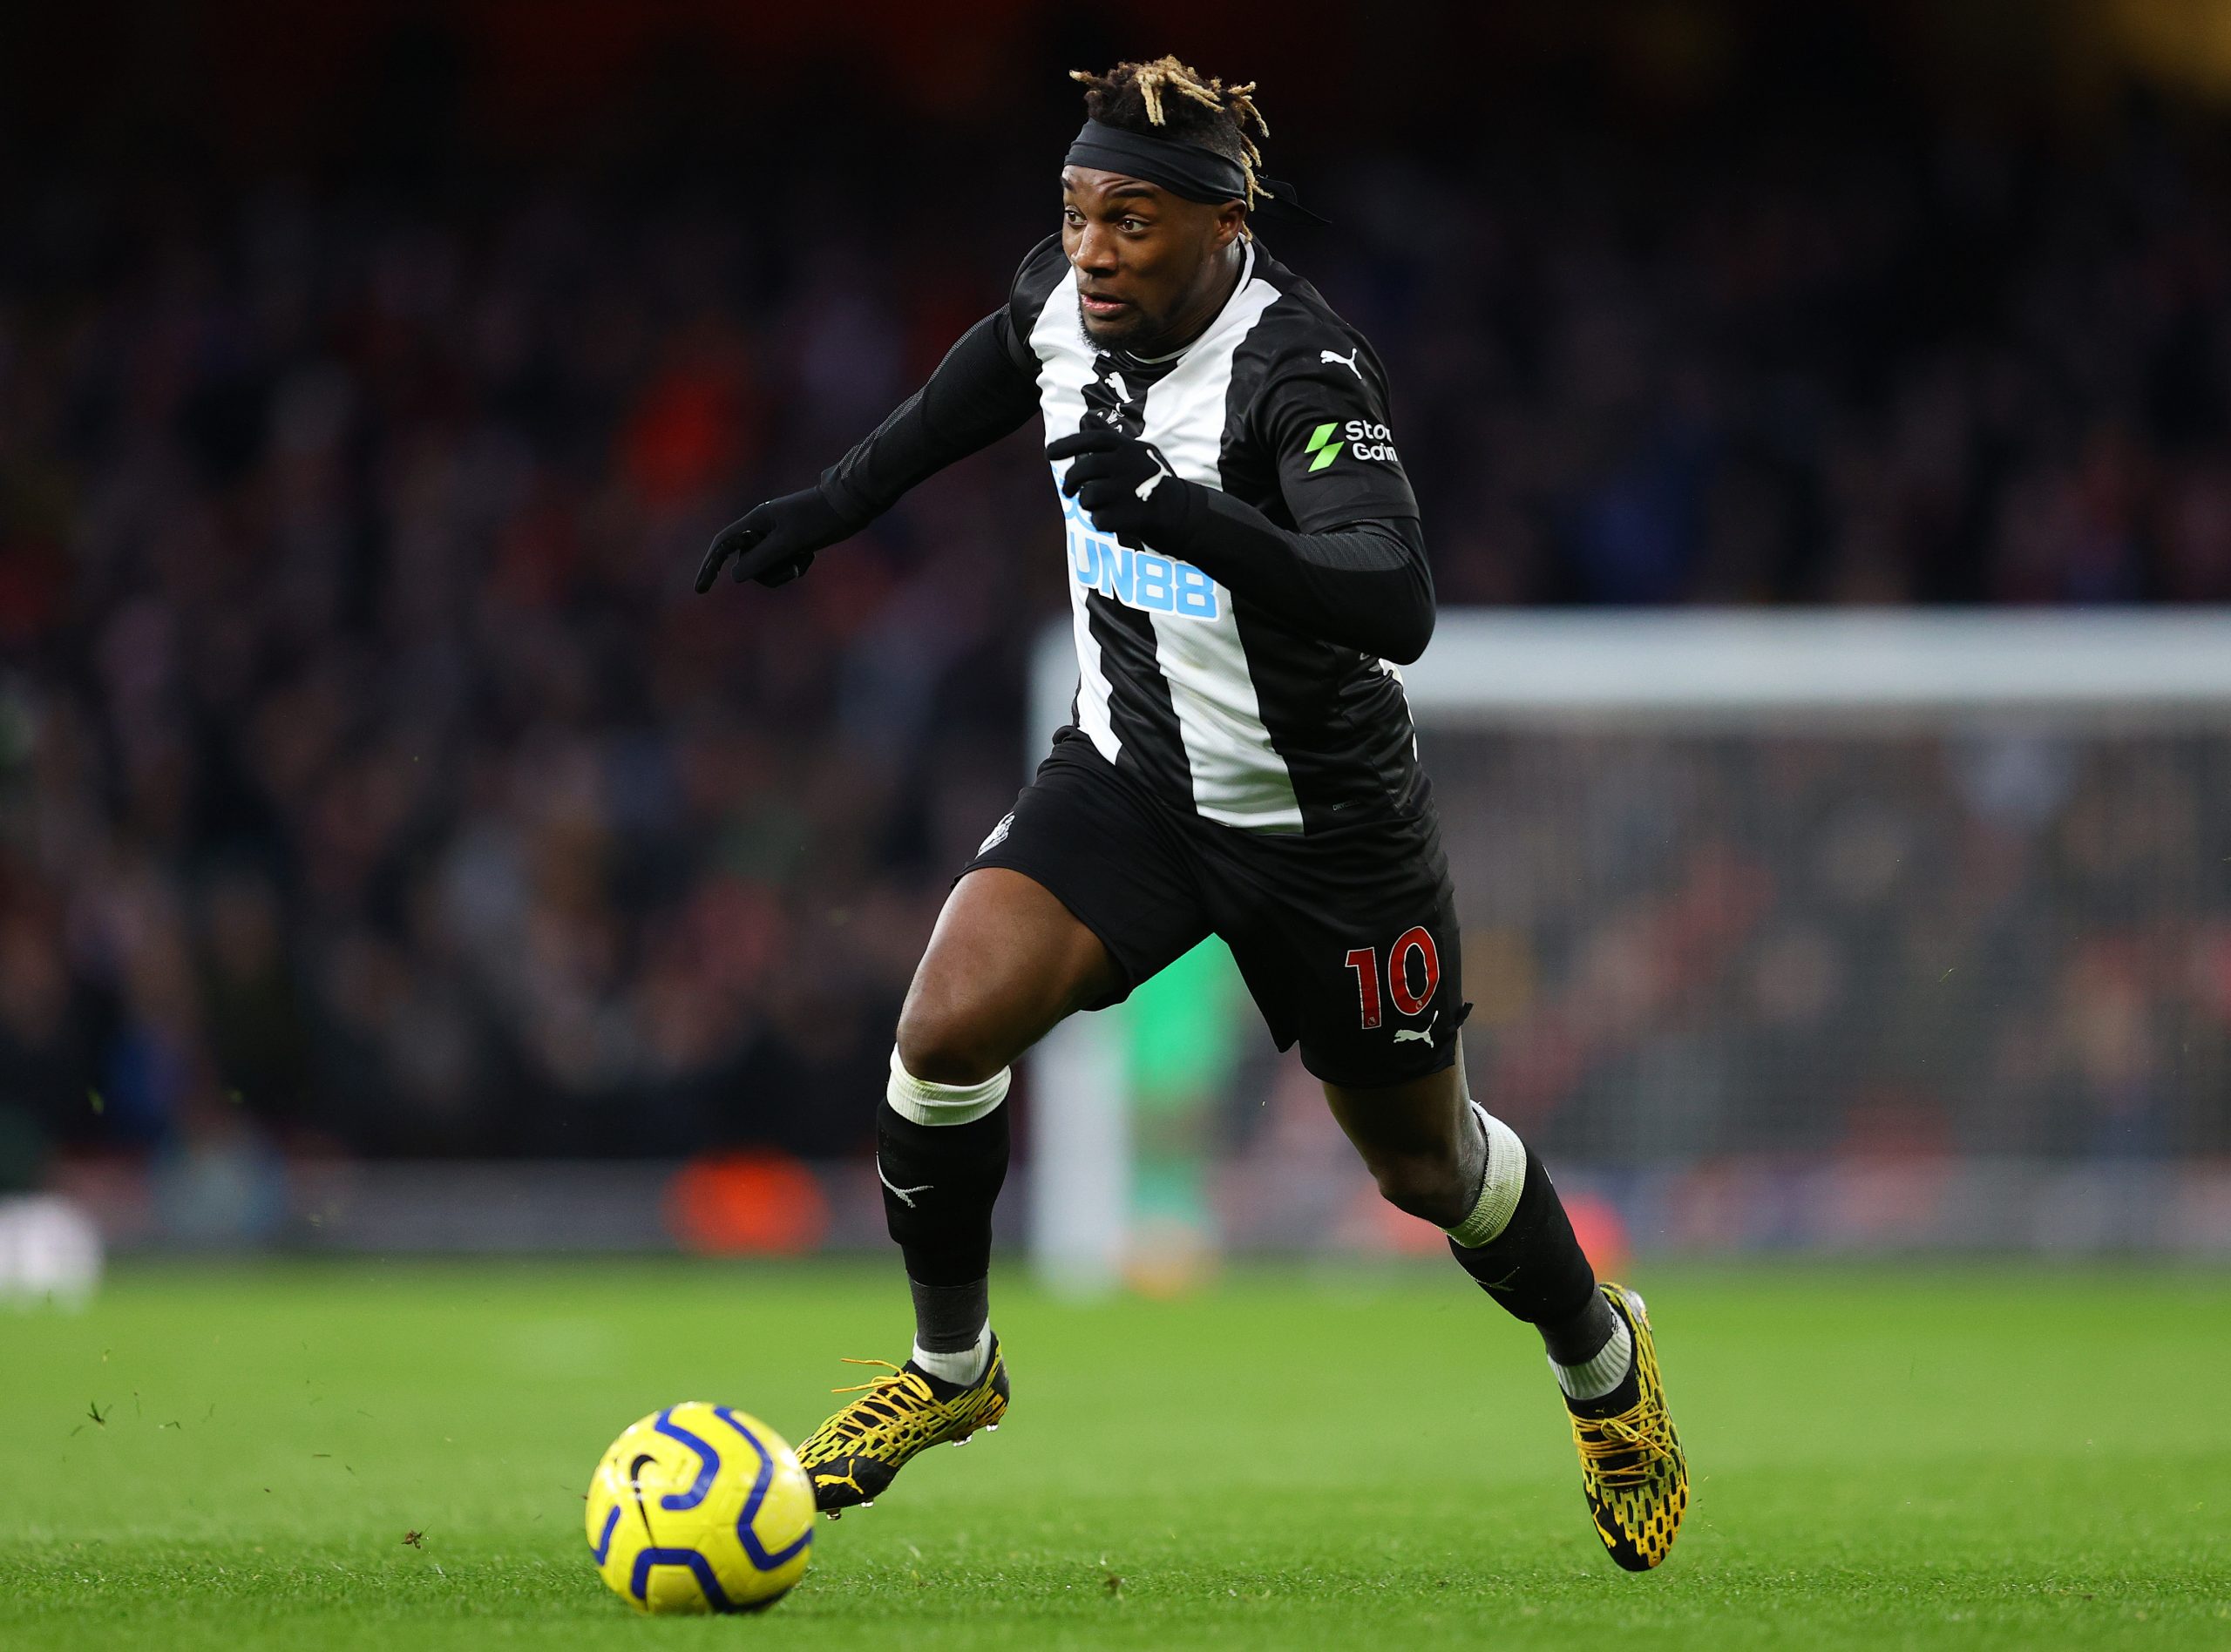 Allan Saint-Maximin has been one of the best players in the league in the last few months (Getty Images)